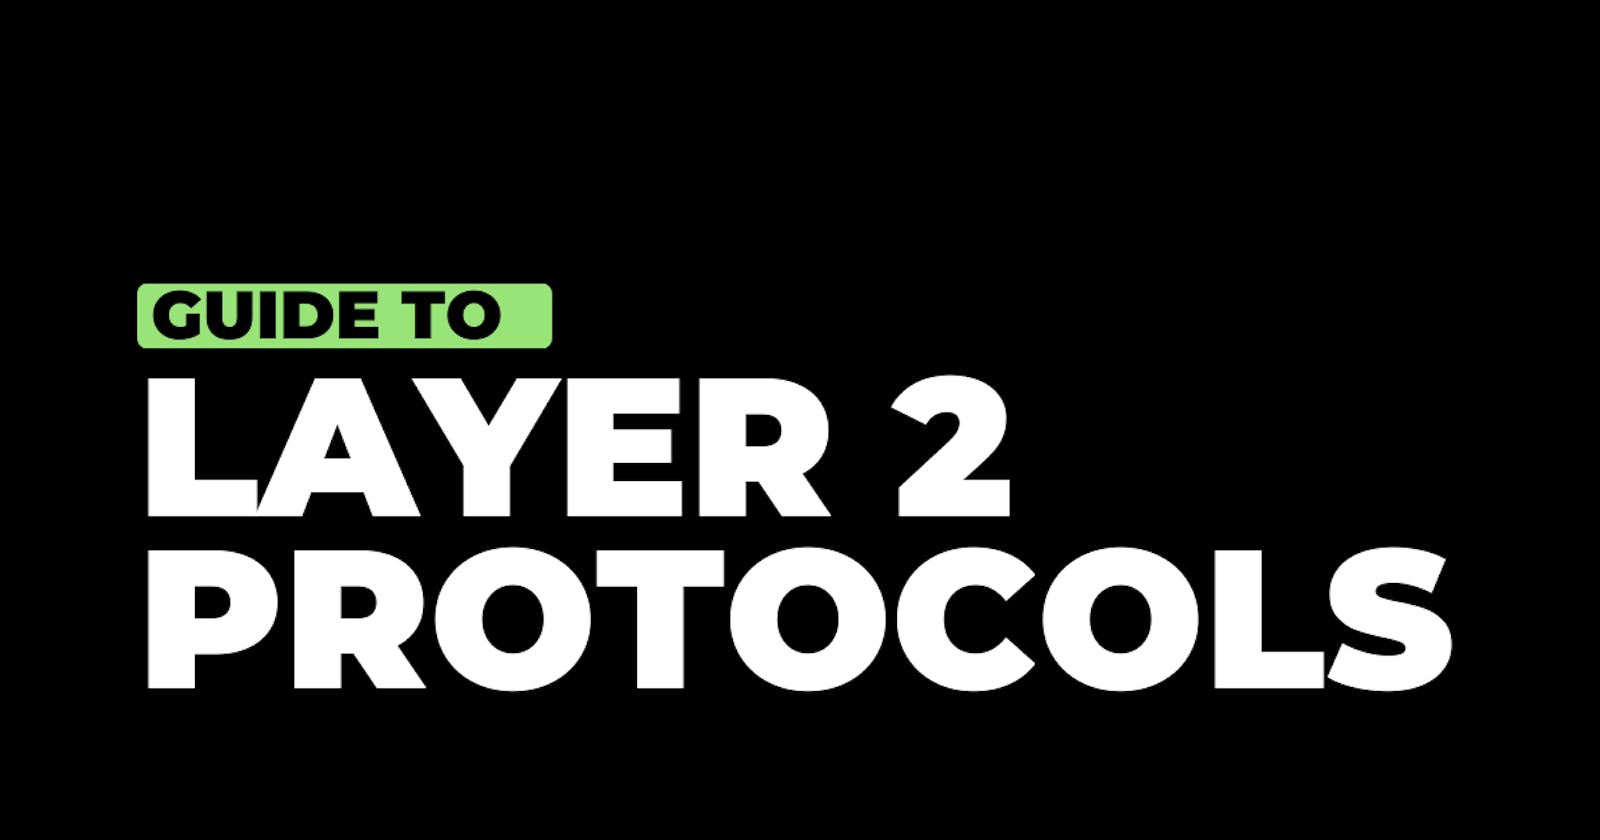 What is Layer 2 protocols in Blockchain ??